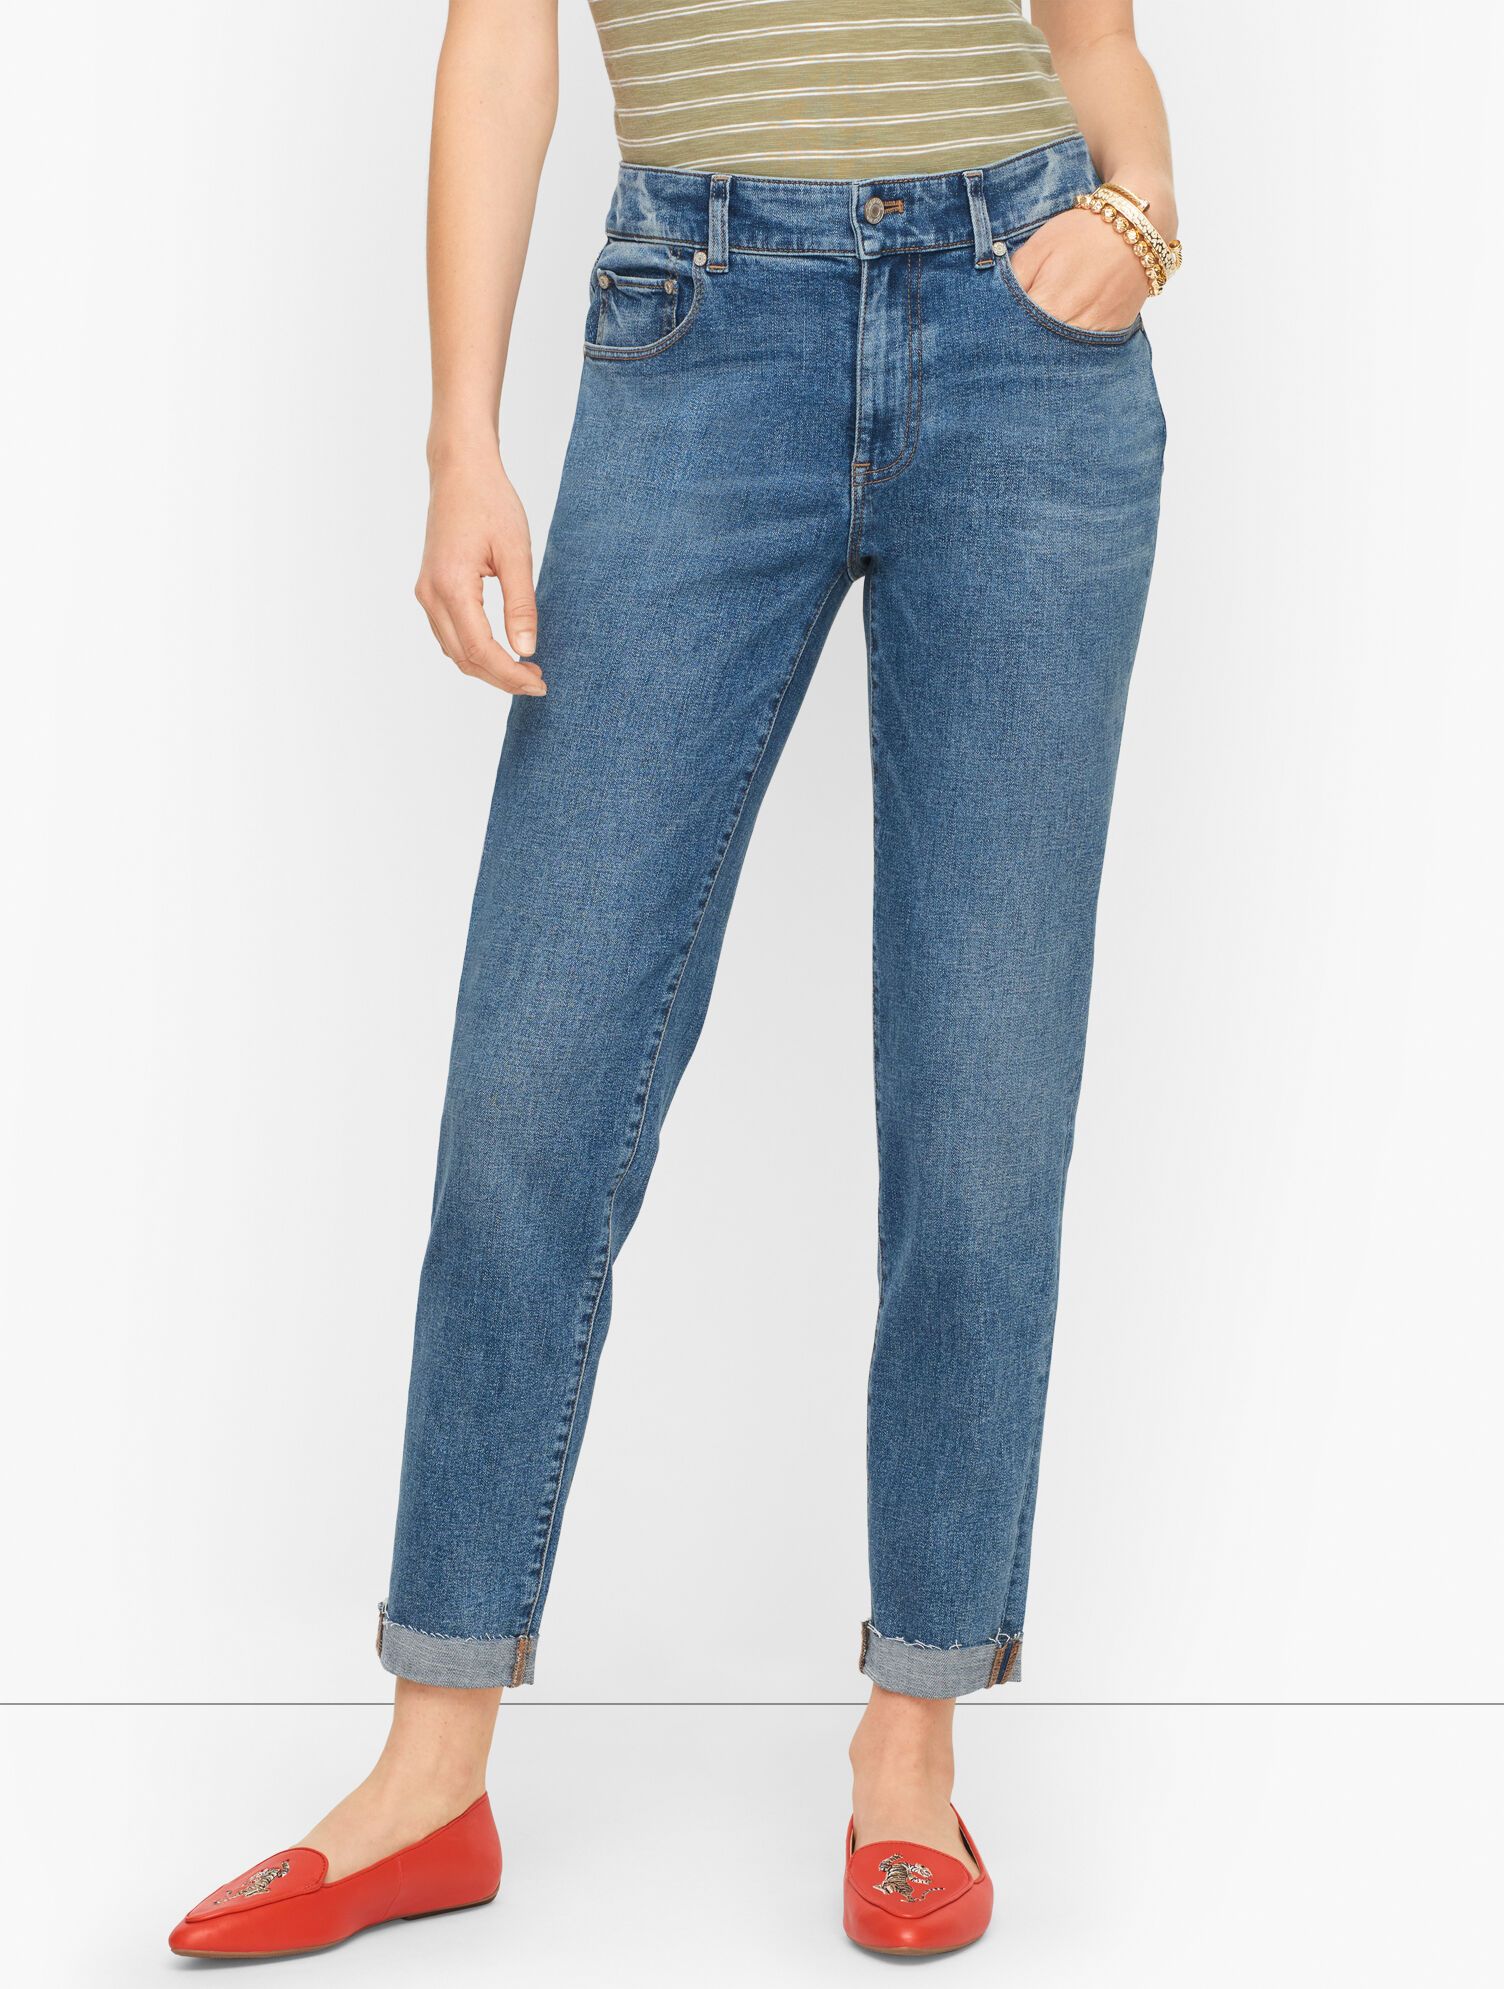 Everyday Relaxed Jeans - Eventide Wash | Talbots